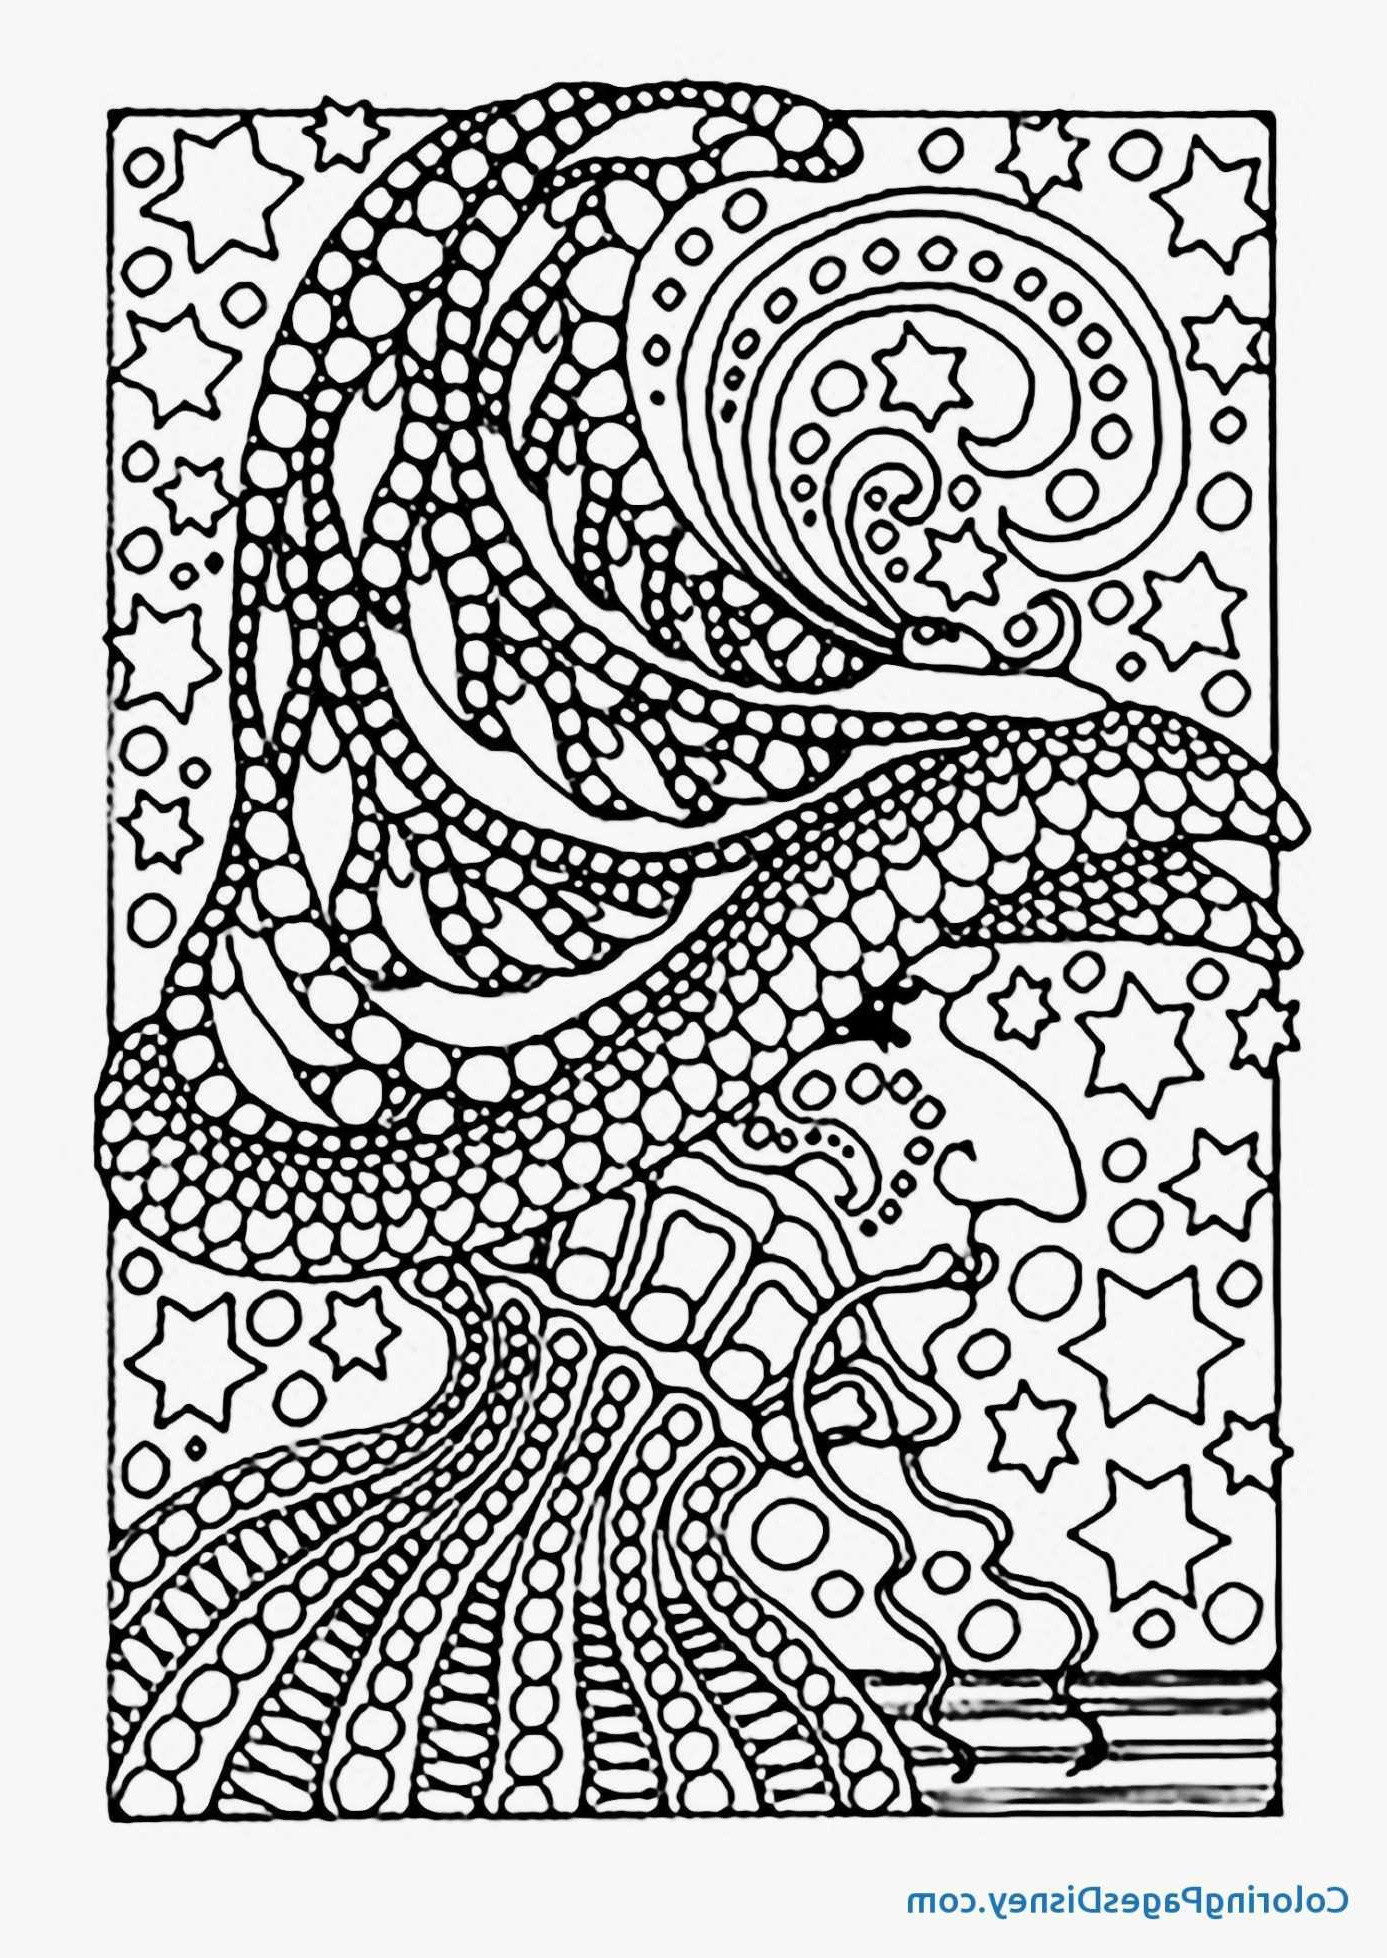 Mother's Day Craft Preschool
 coloring Outstanding Mother039s Day Preschool Coloring